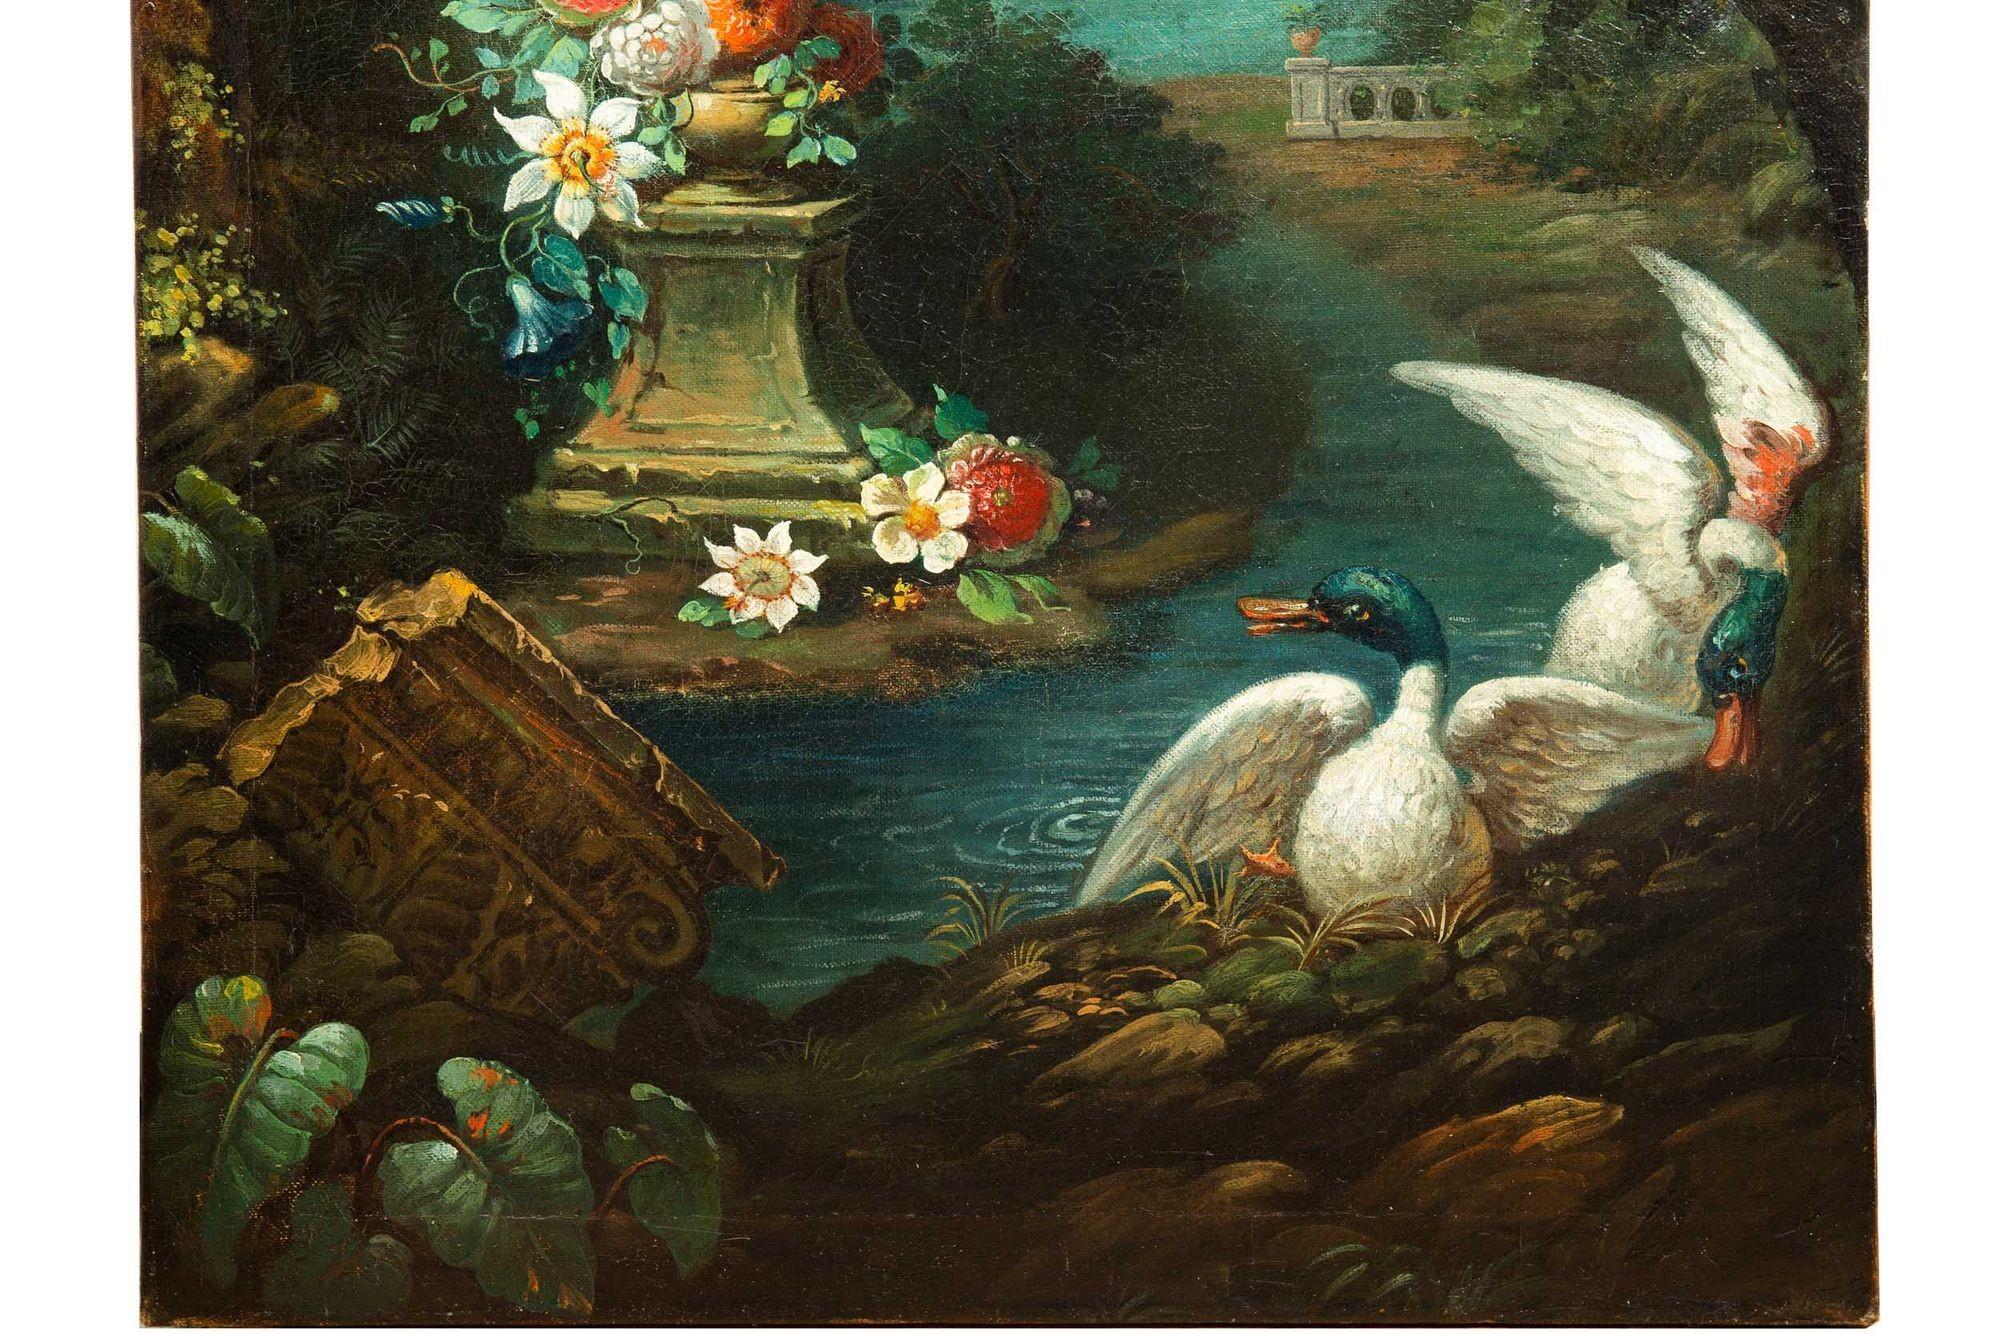 European Italianate “Ducks in a Garden” Landscape Painting, 19th Century In Good Condition For Sale In Shippensburg, PA